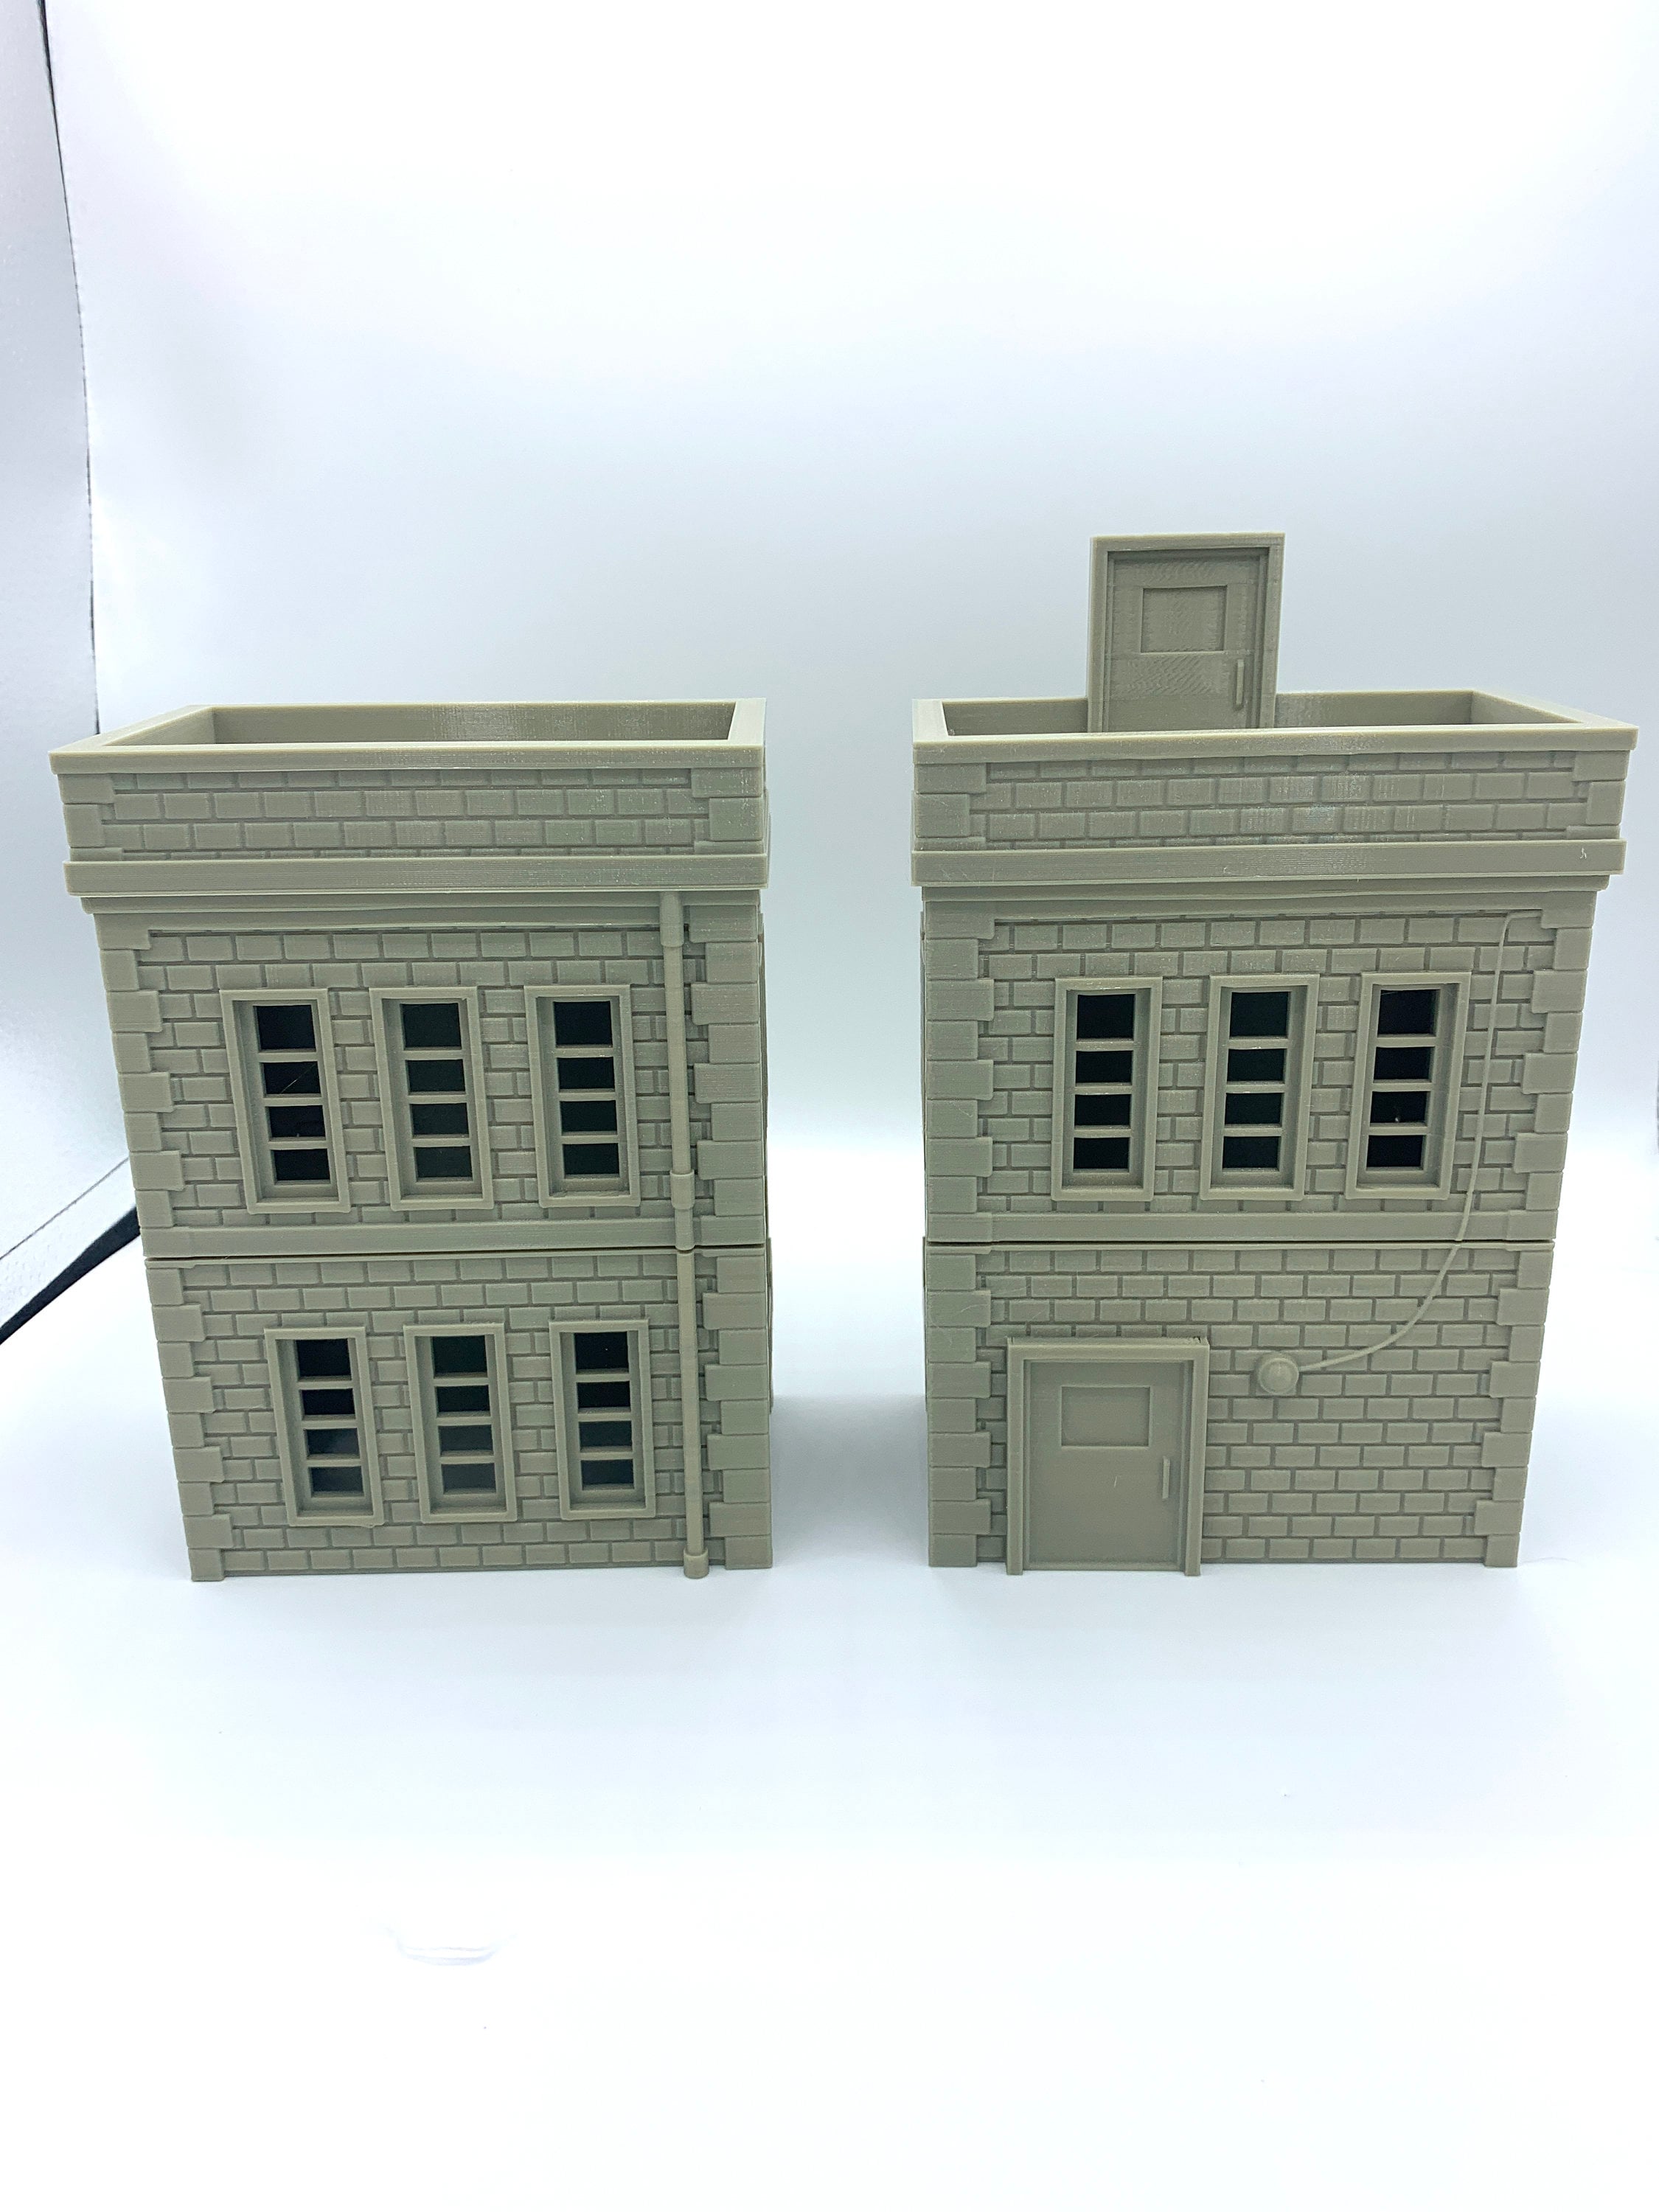 3d Printed Police Station / Crisis Protocol Compatible Option / Corvus Games Terrain Licensed Printer / Print to Order